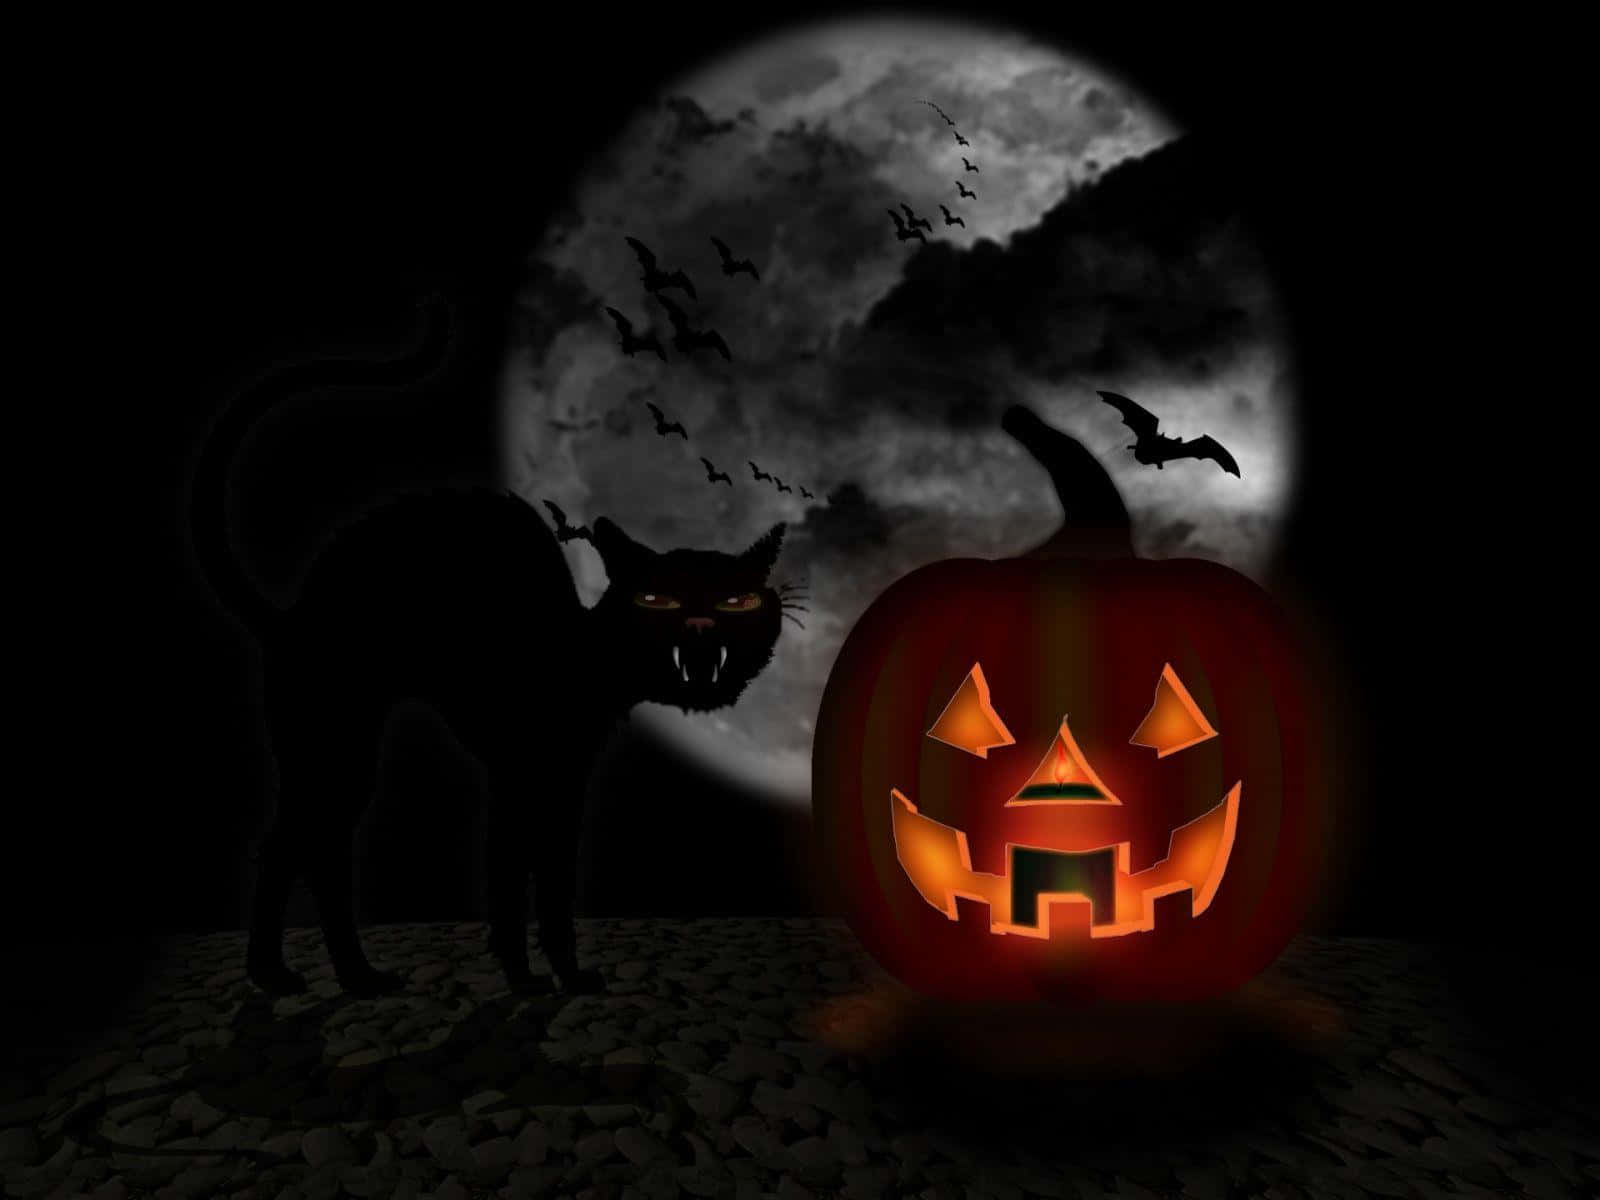 Set your Halloween mood right with this spooky animated background! Wallpaper